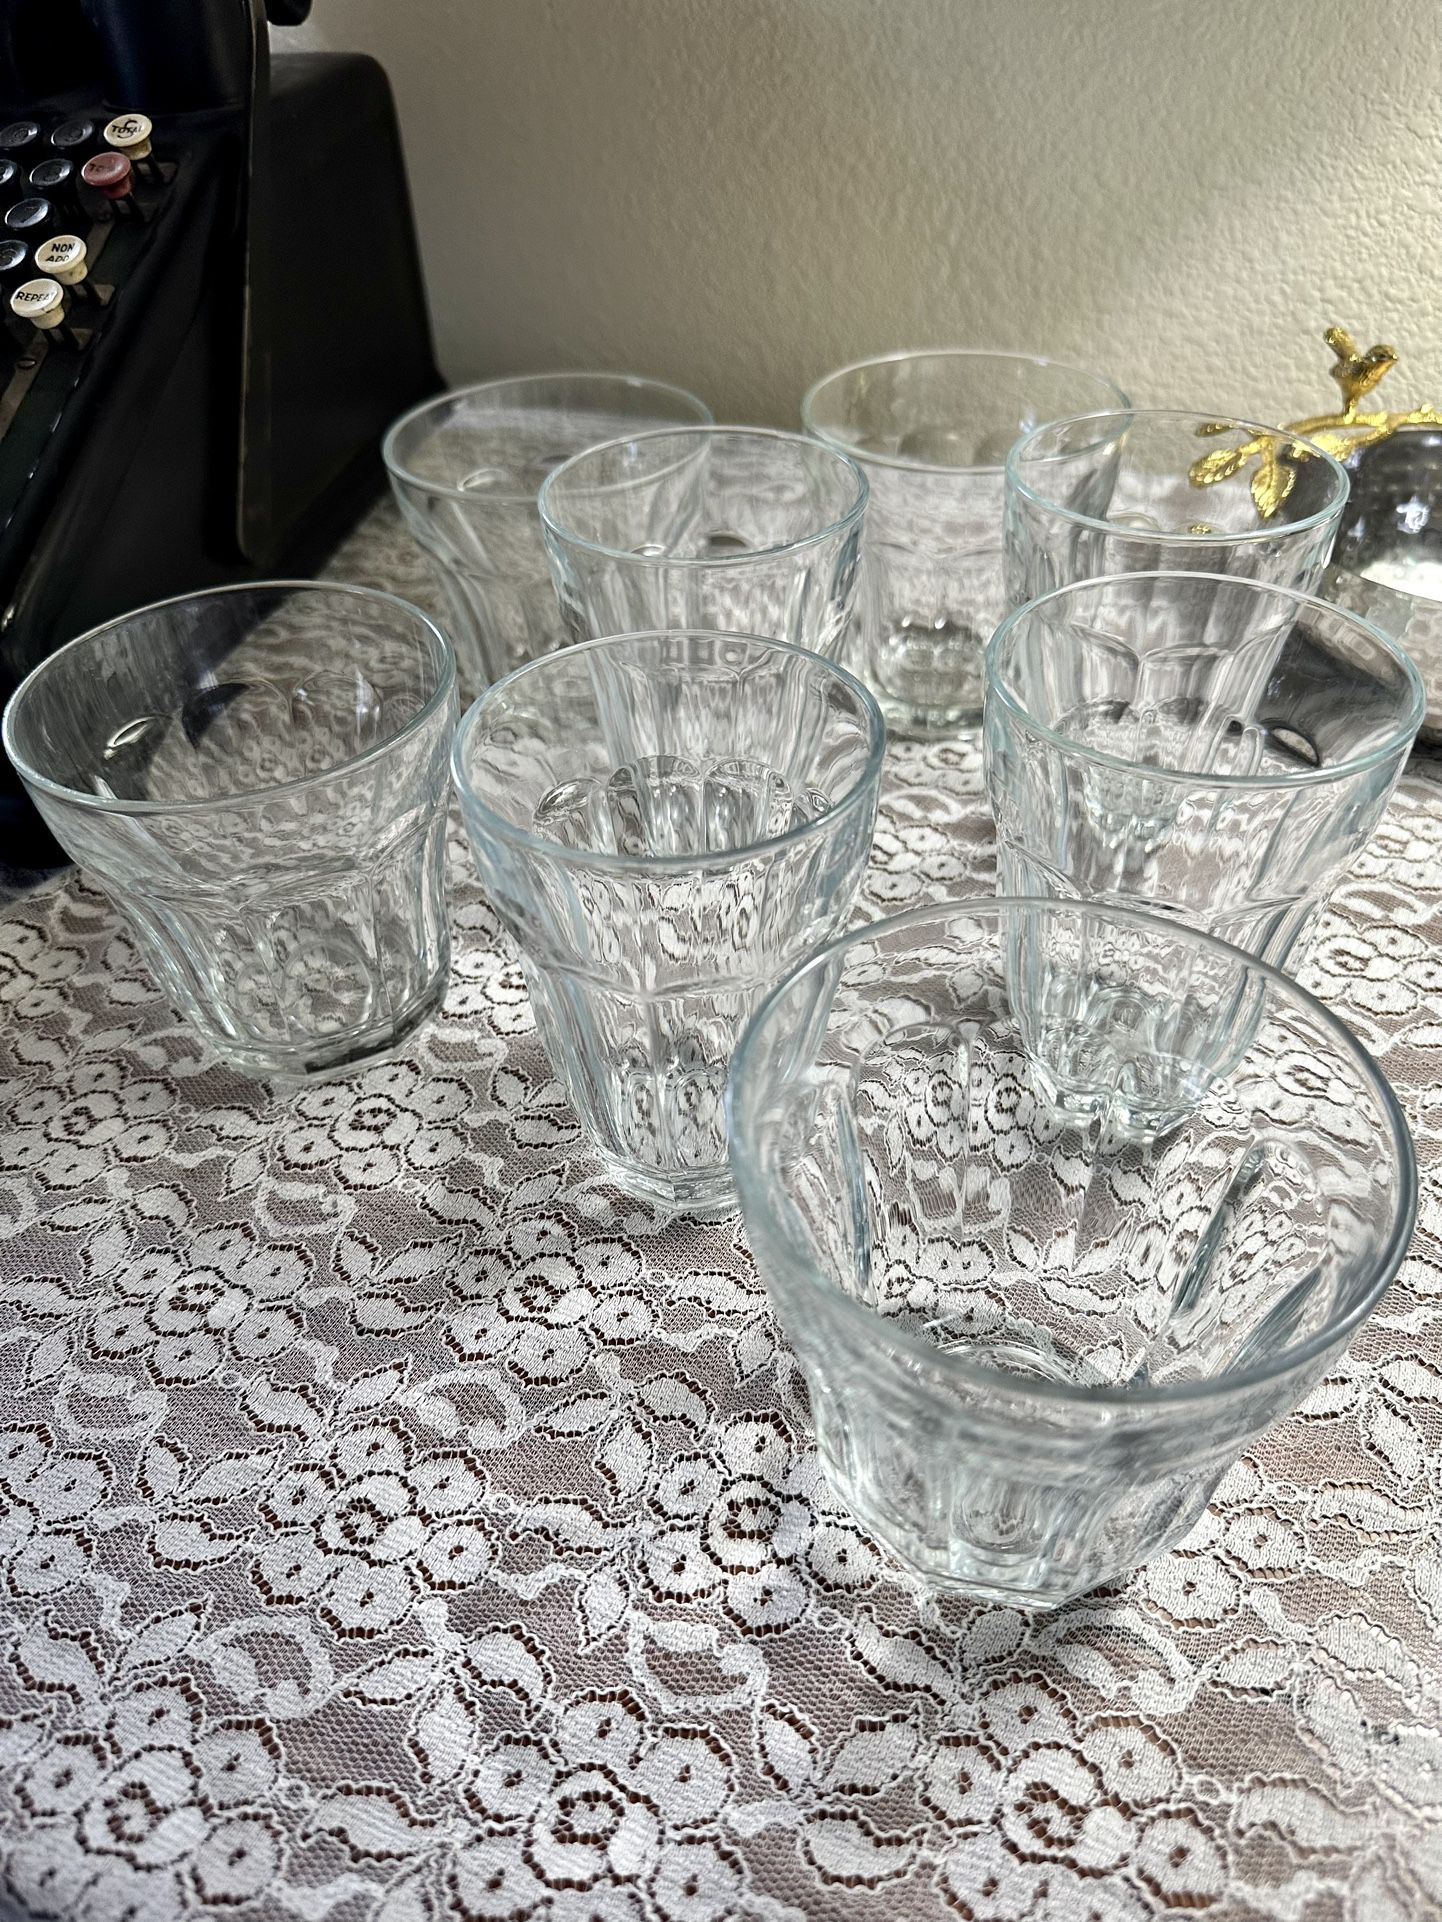 NORLAN Whisky Glasses (Set Of 2) for Sale in San Diego, CA - OfferUp